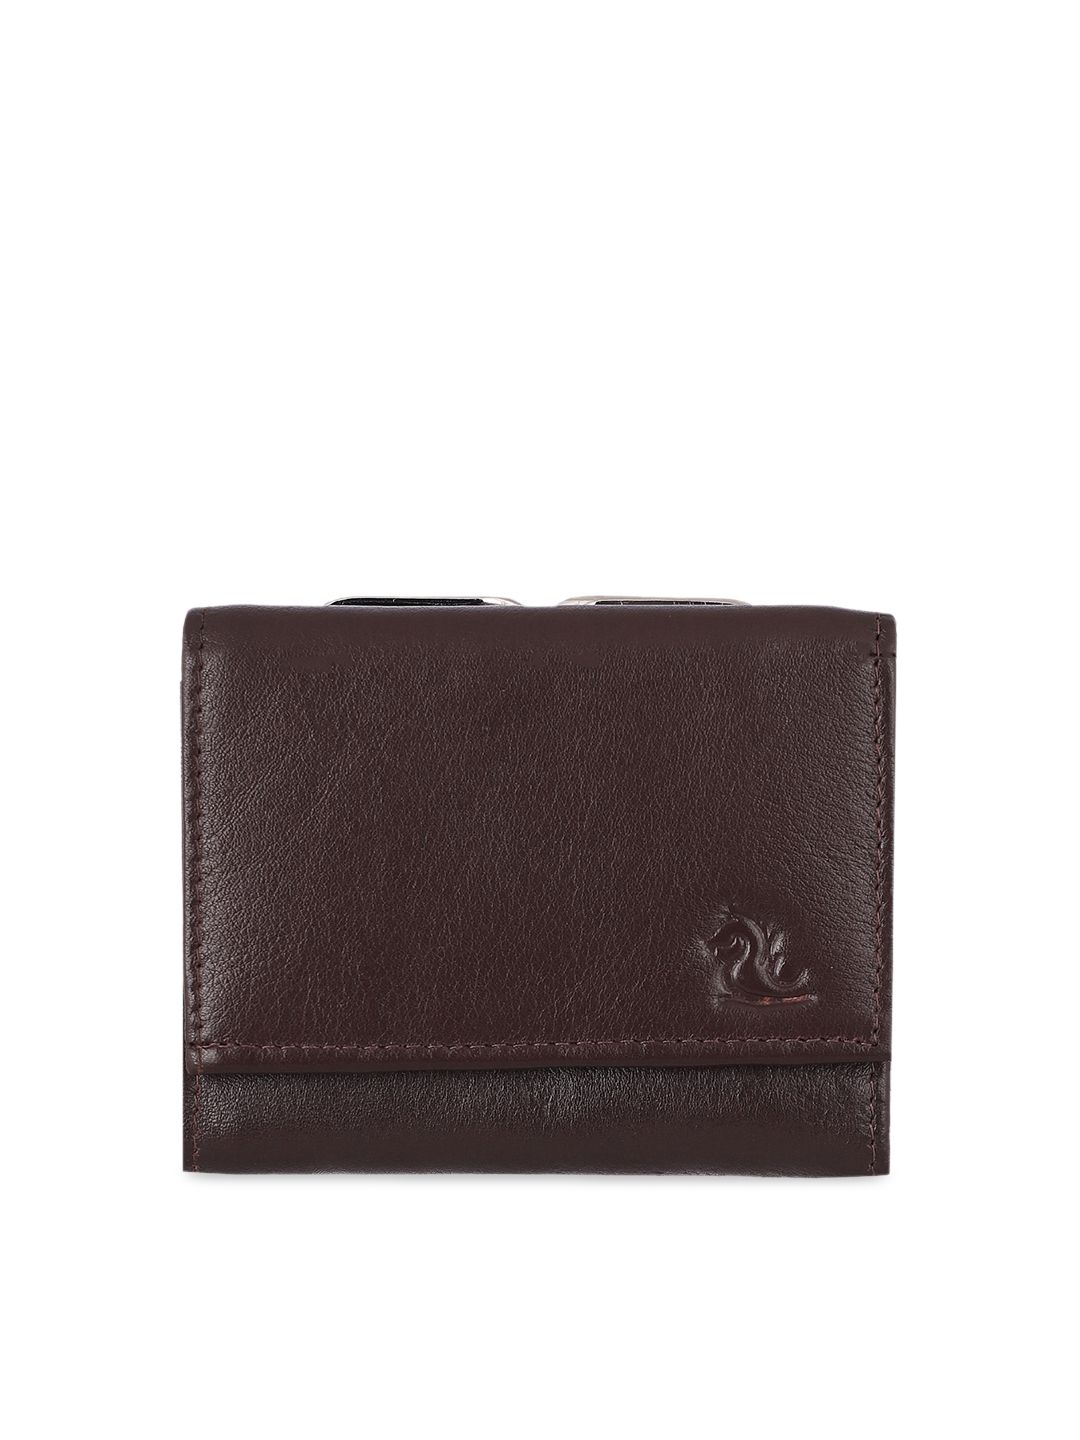 Kara Women Coffee Brown Solid Three Fold Leather Wallet Price in India